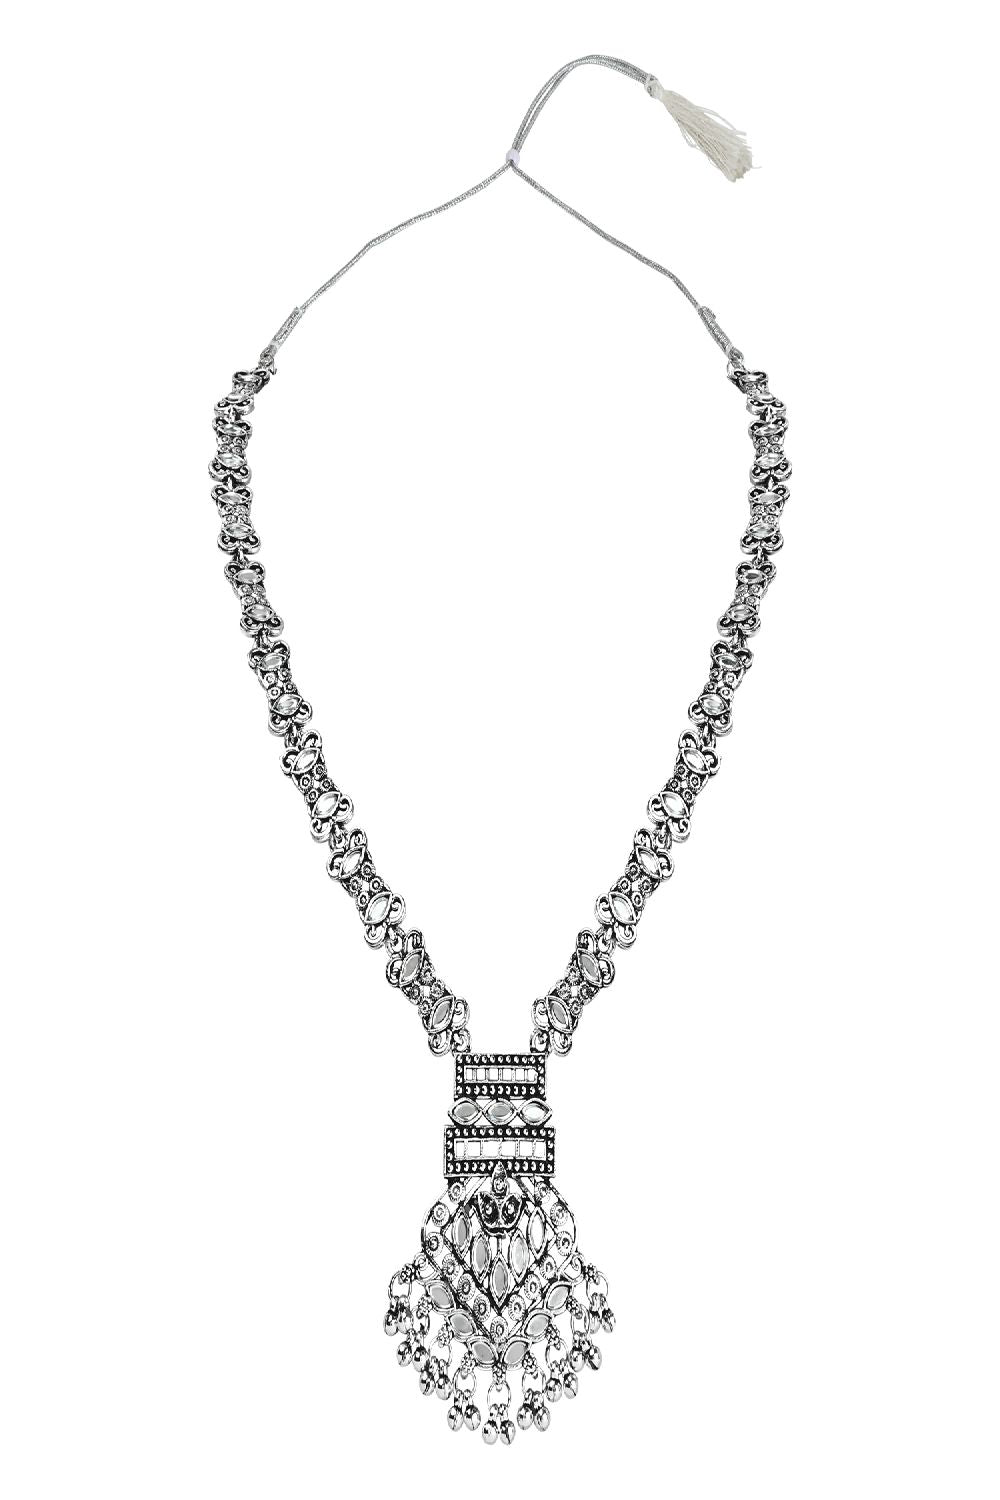 Silver Oxidised Traditional Long Necklace with Earring Set